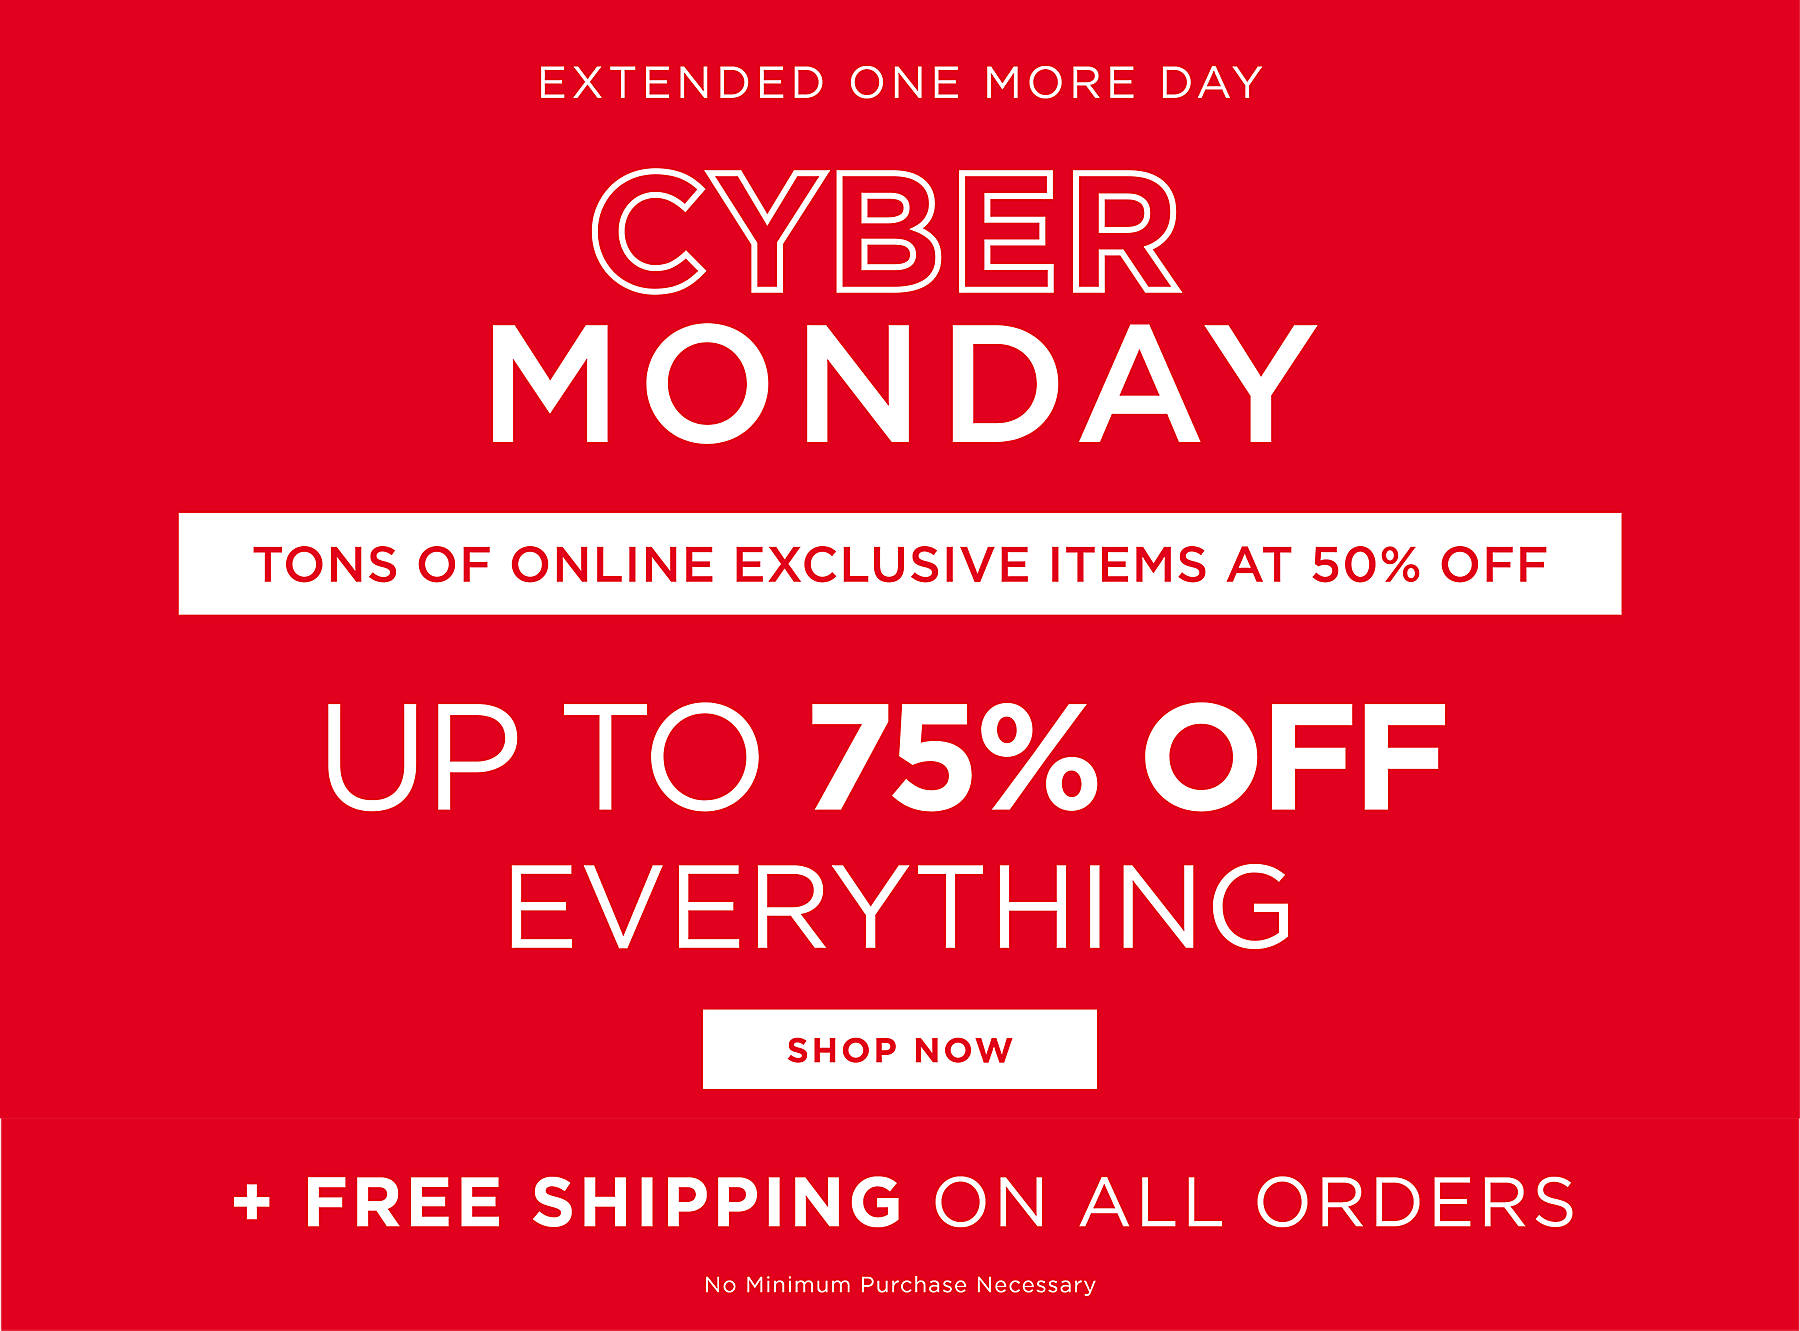 Extended One More Day Cyber Monday Tons of Online Exclusive Items at 50% Off Up to 75% Off Everything Shop Now Plus Free Shipping on All Orders No Minimum Purchase Necessary